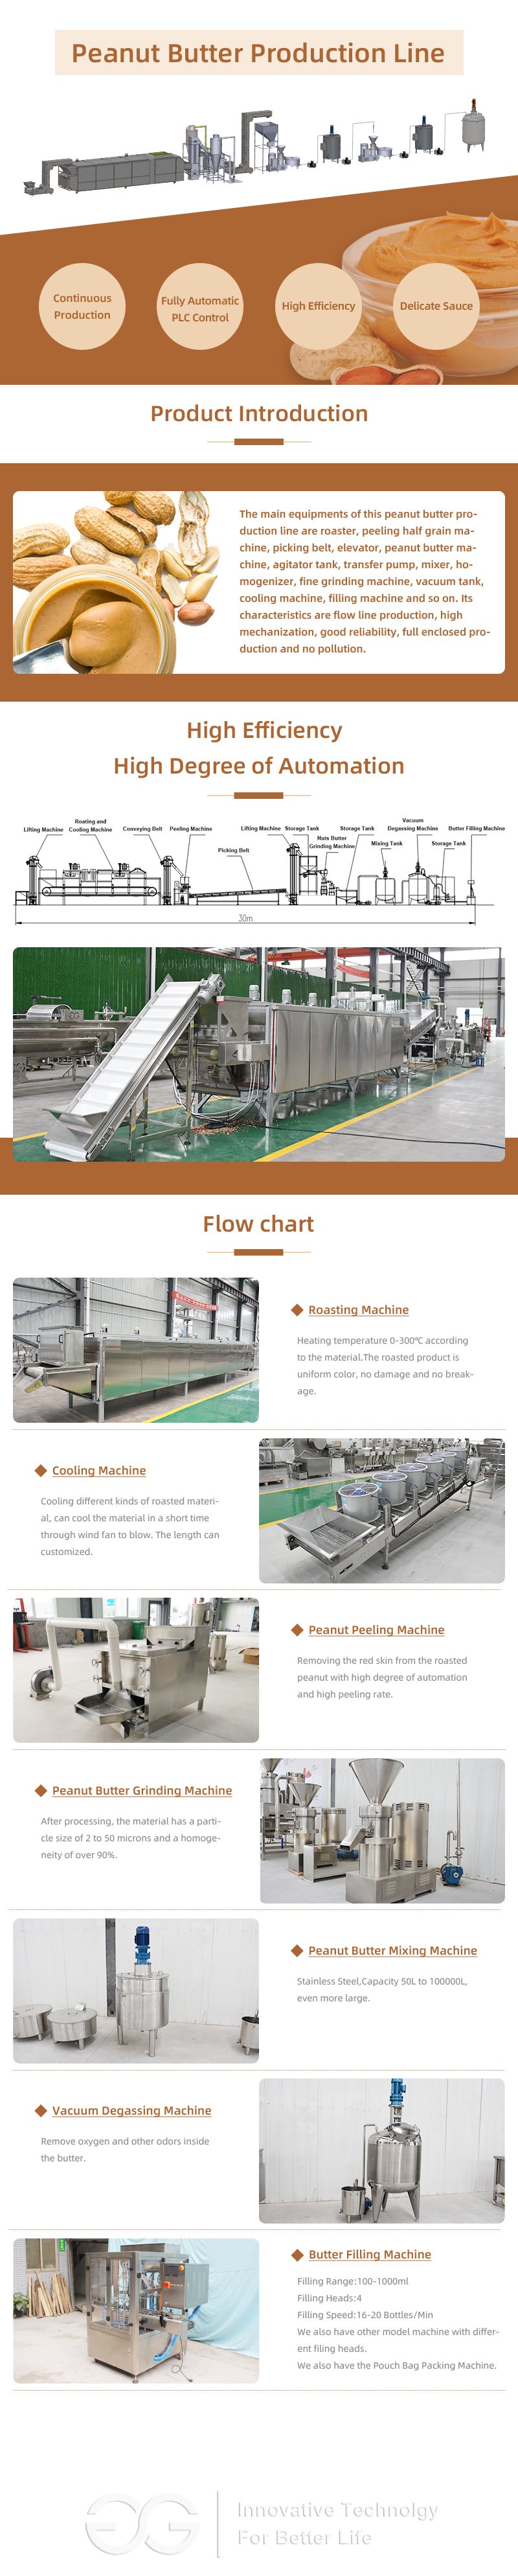 Peanut Butter Production Line Working Production Process